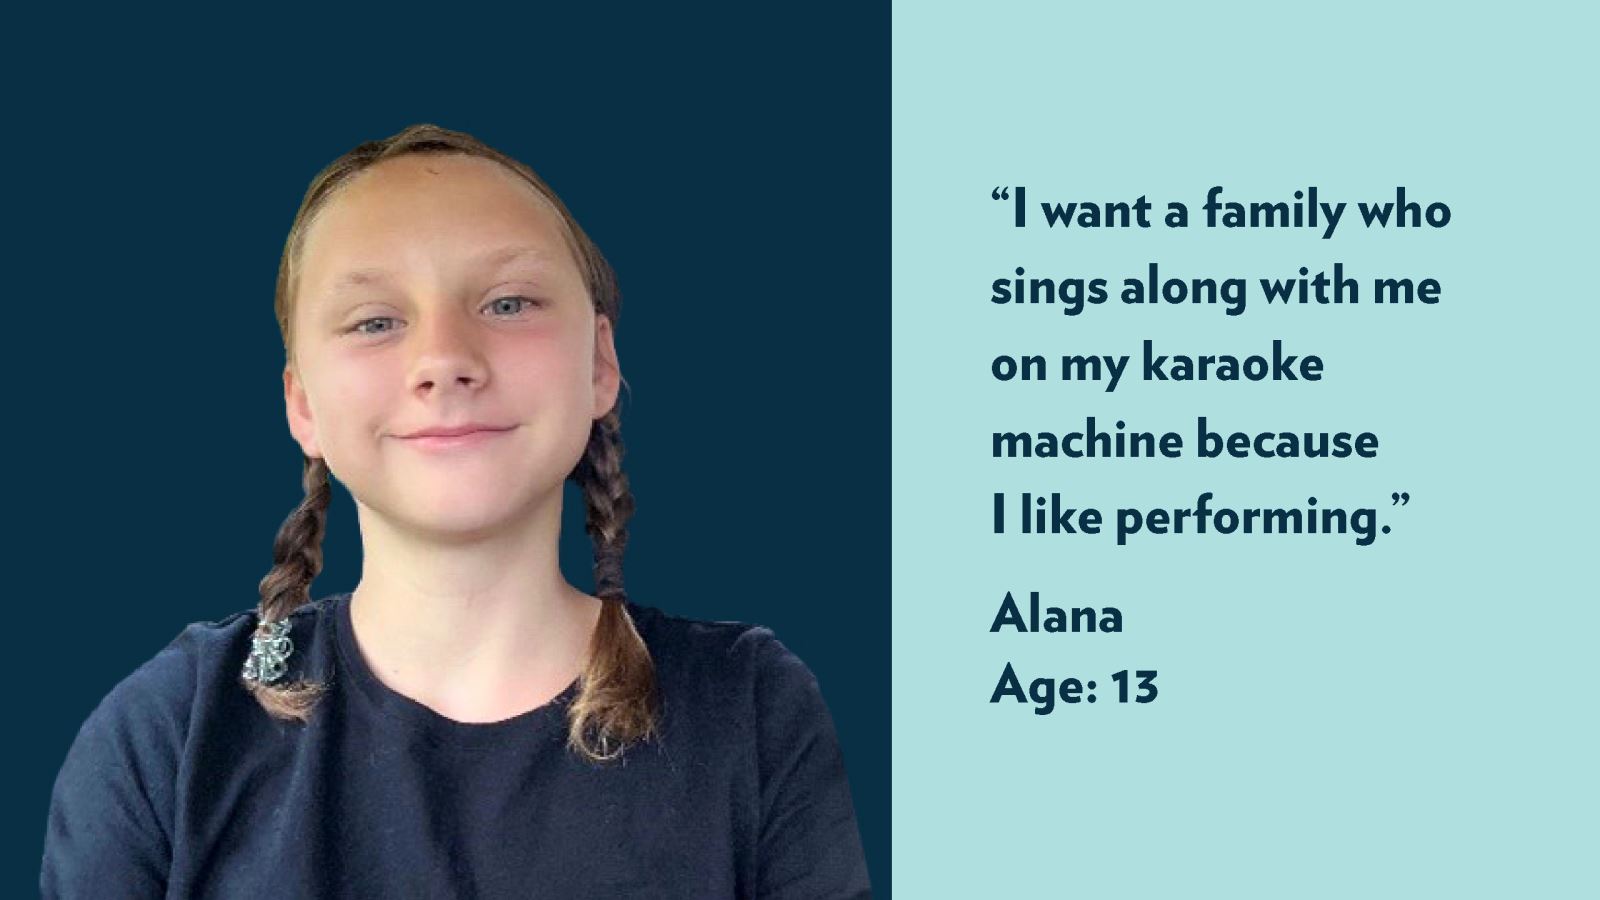 I want a family who sings along with me on my karaoke machine because I like performing. Alana, age 13. View profile.